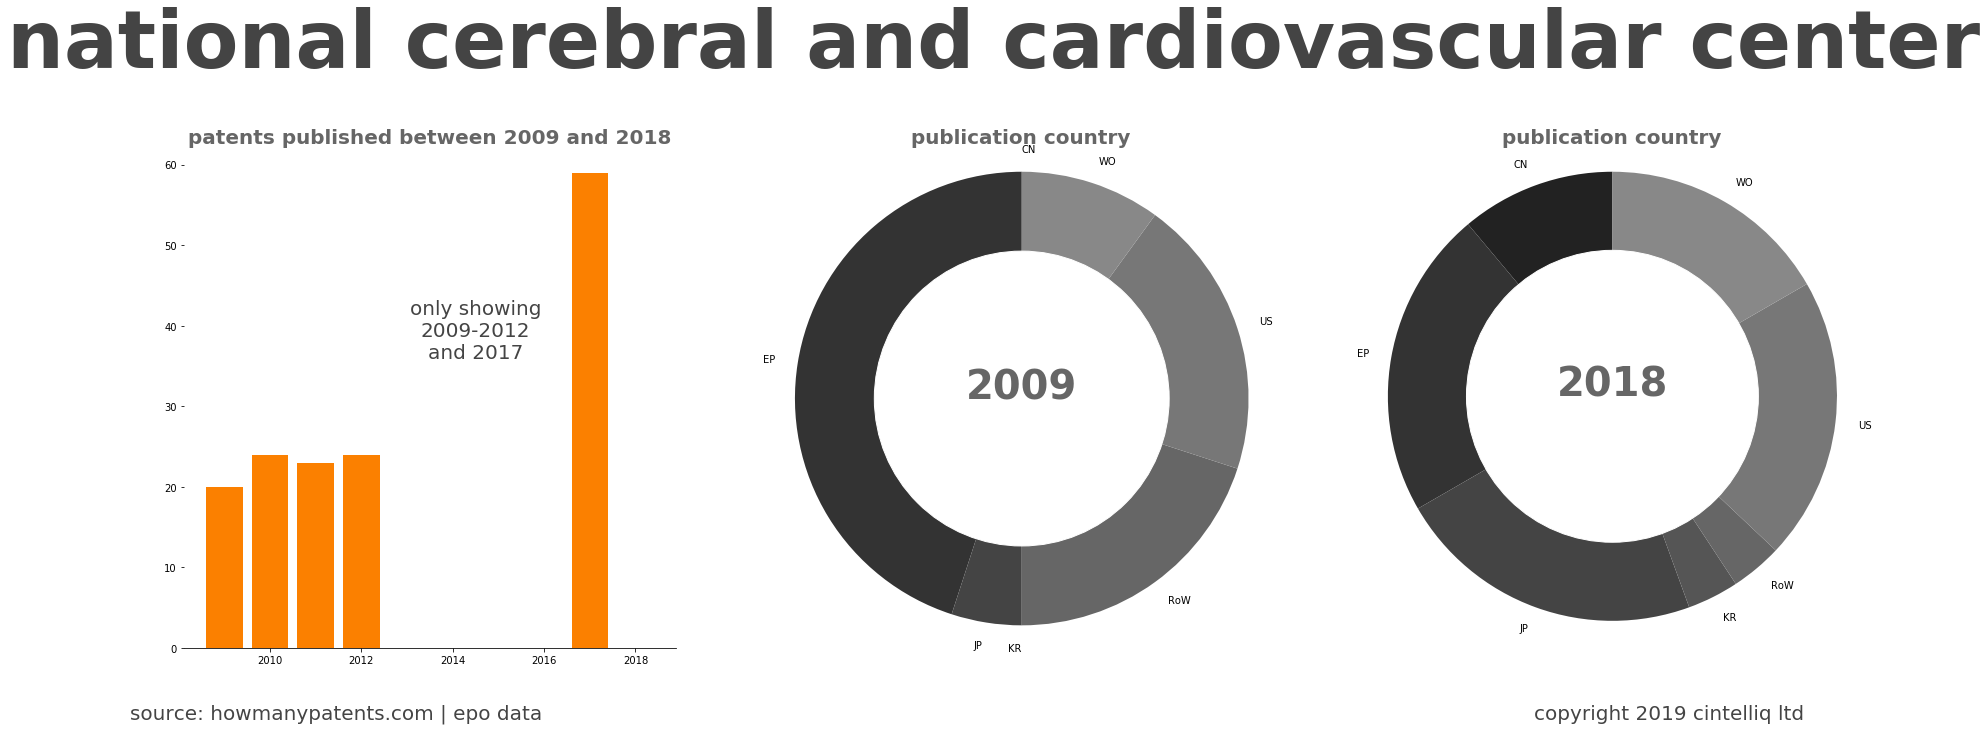 summary of patents for National Cerebral And Cardiovascular Center